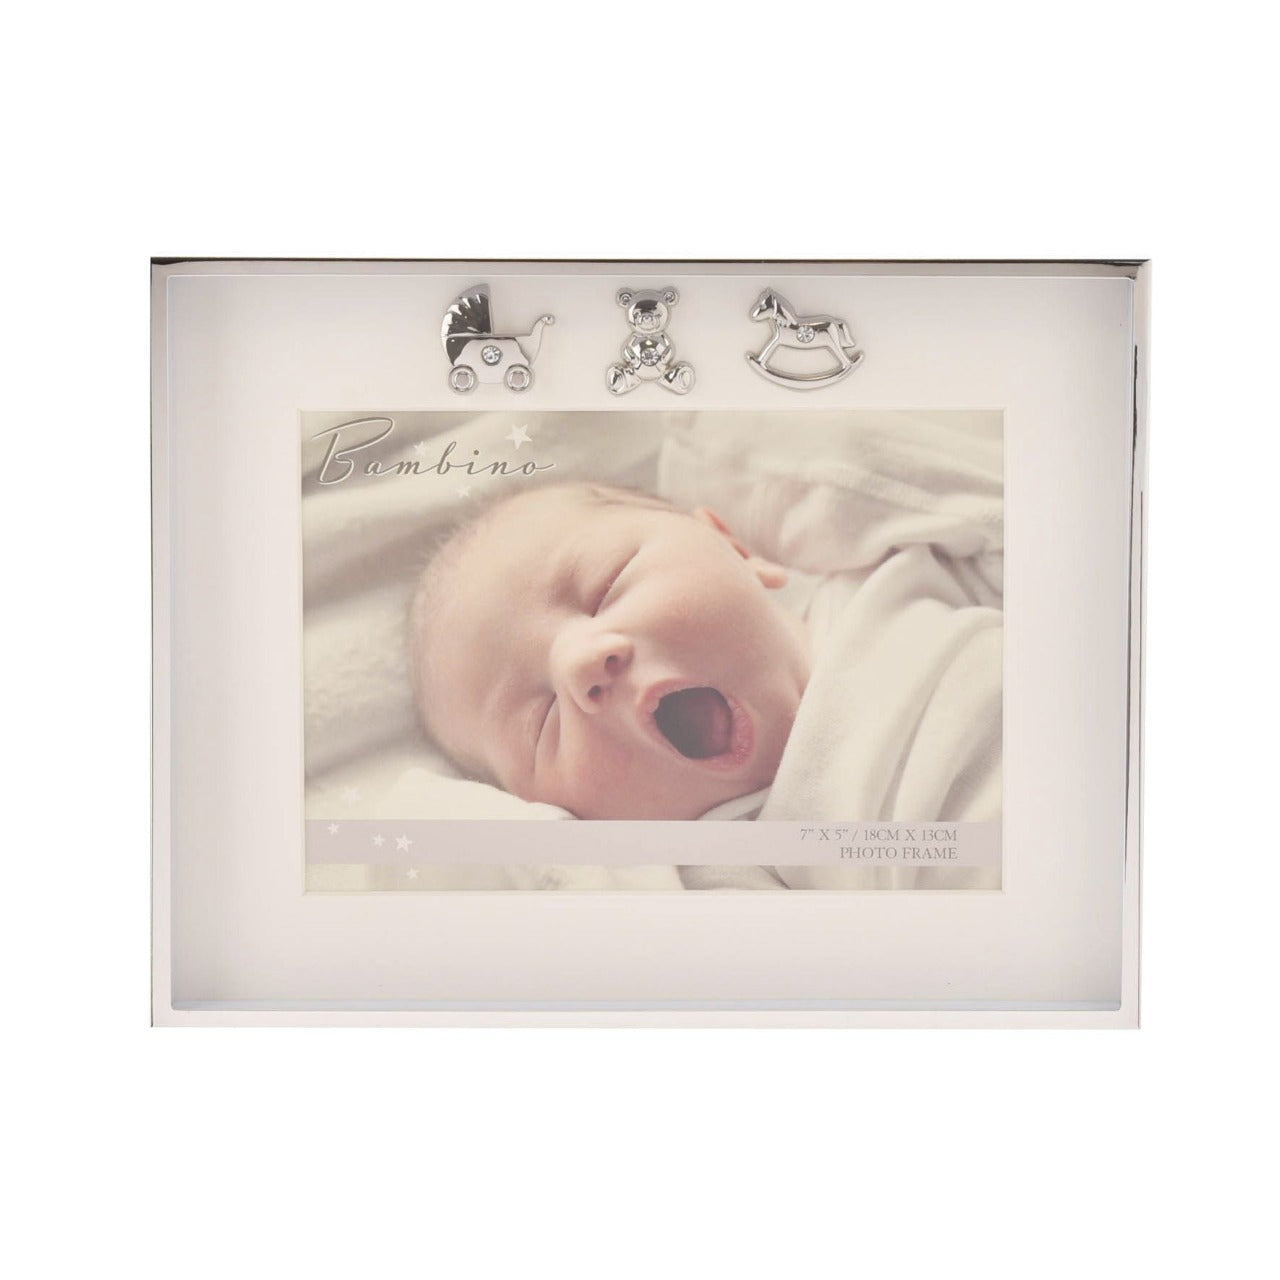 Bambino Thin Silver Plated Photo Frame 7" x 5"  A gorgeous 7" x 5" silver plated photo frame from BAMBINO BY JULIANA®. The box frame is embellished with crystal finished teddy bear, pram and rocking horse icons and features a crisp white mount and standing strut.